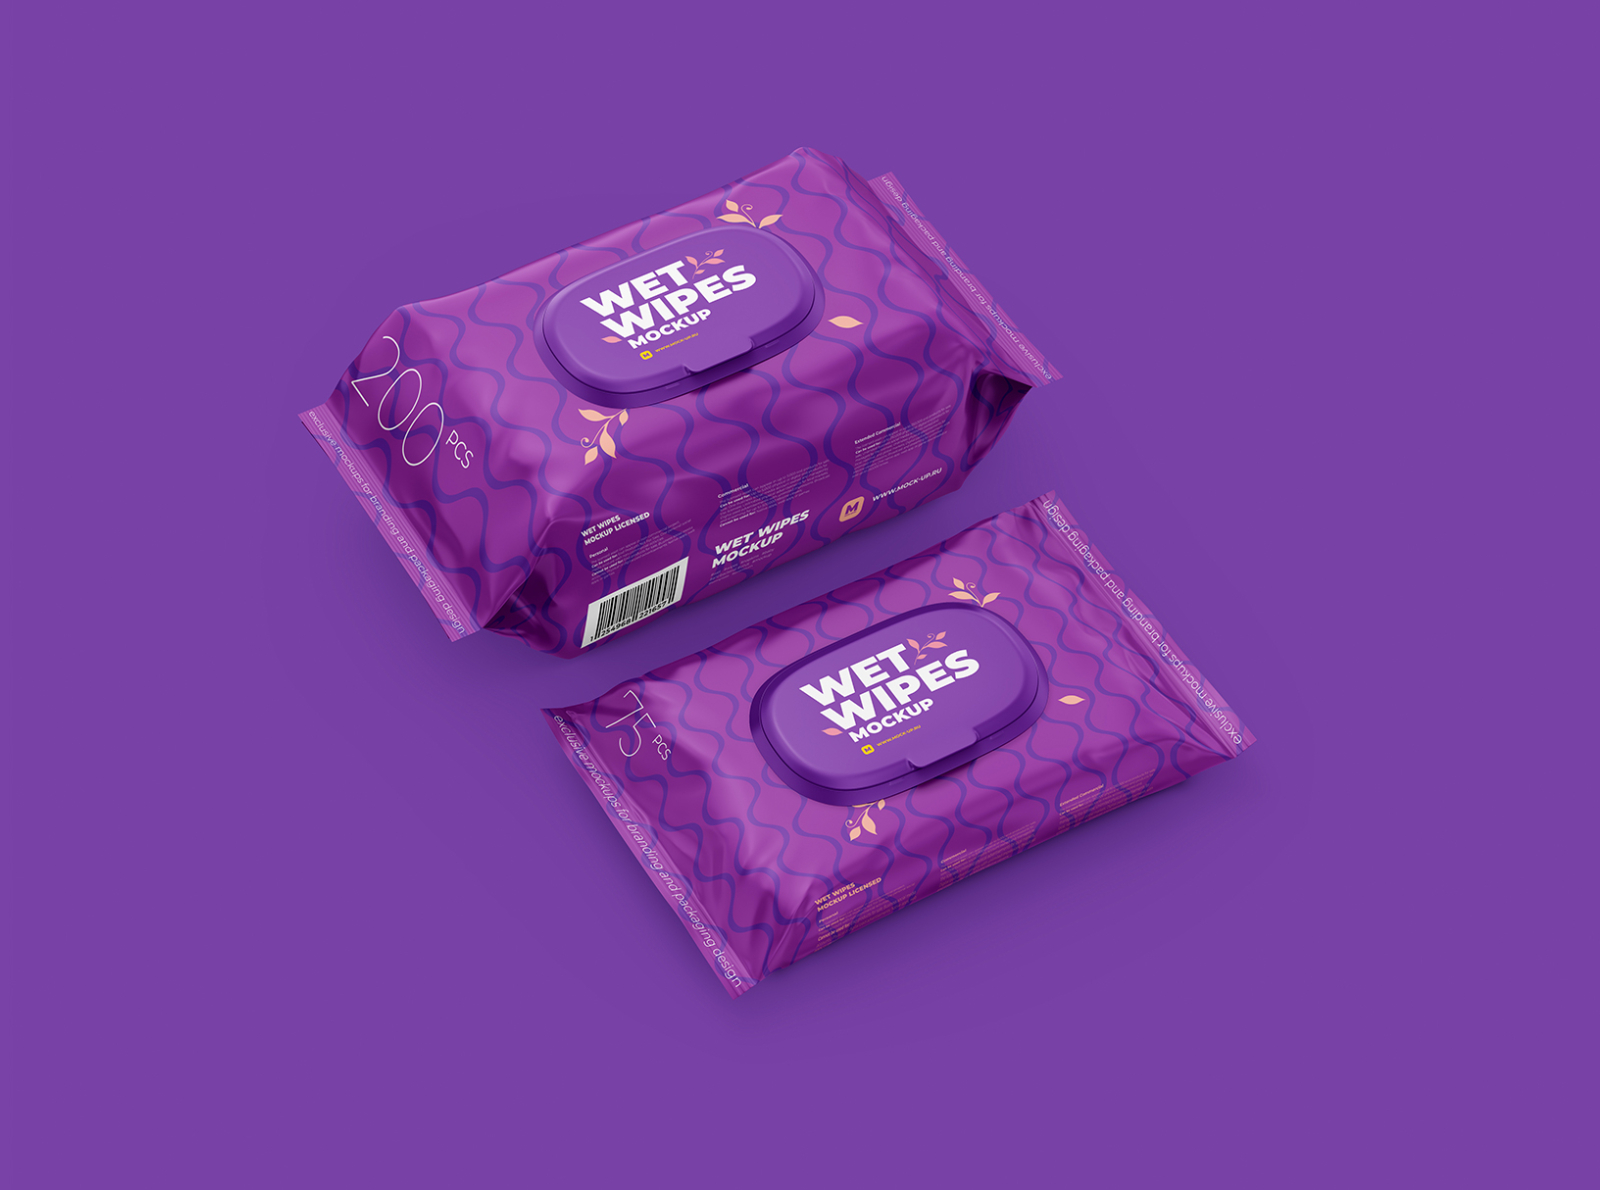 Download Wet Wipes Mockup, large and small packaging by Aleksey Volos on Dribbble